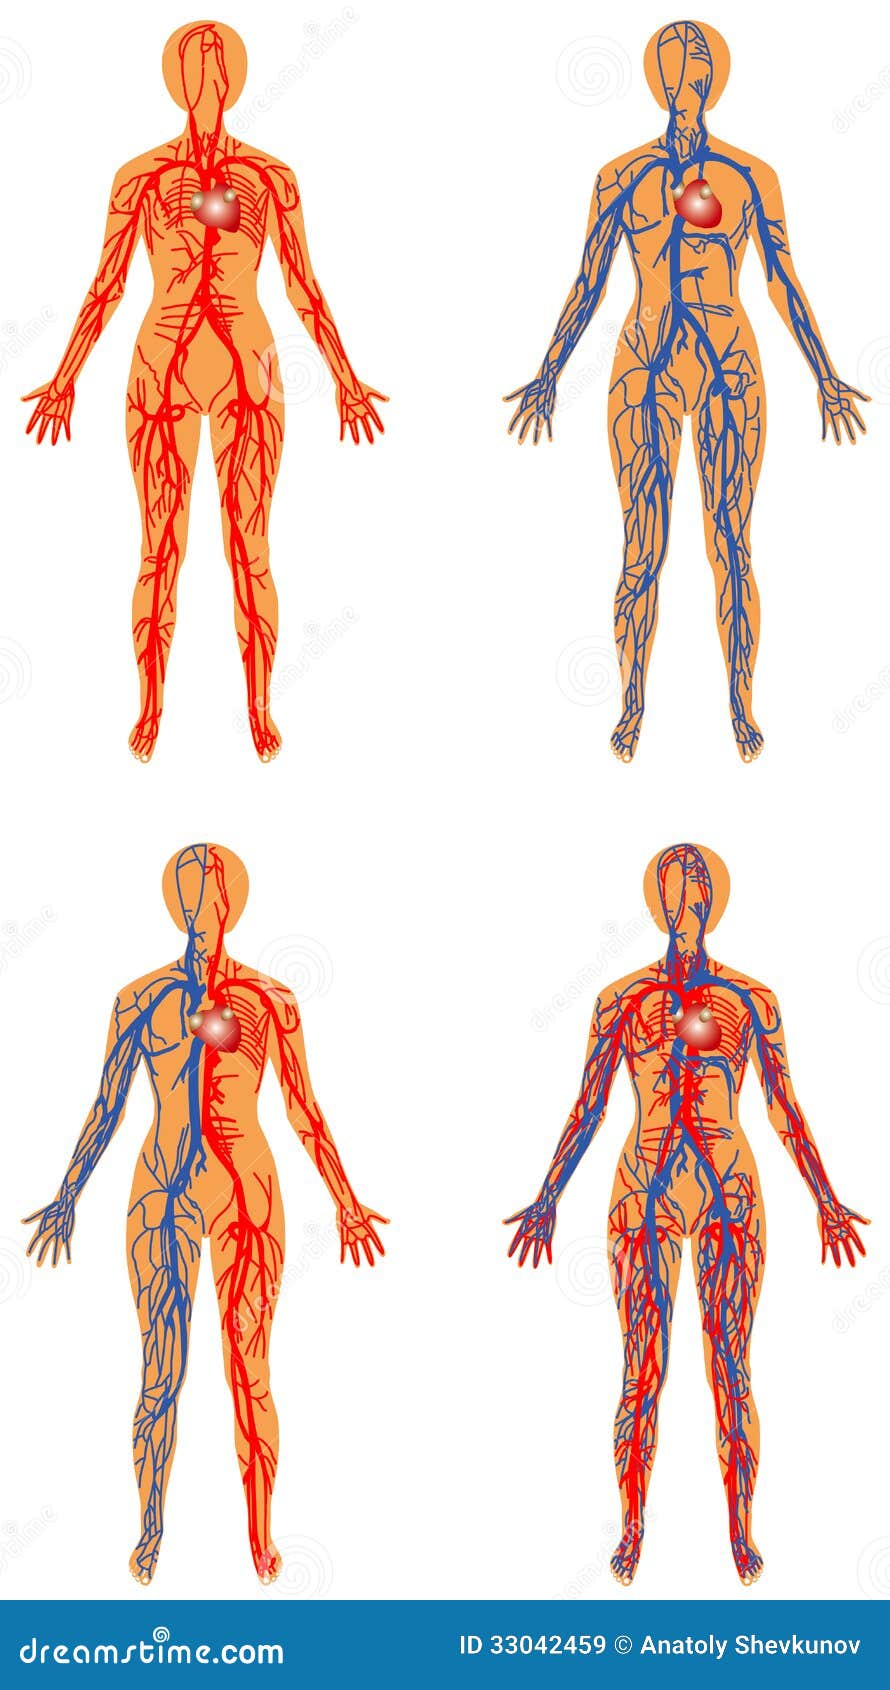 Human Vascular System Royalty Free Stock Images - Image: 33042459